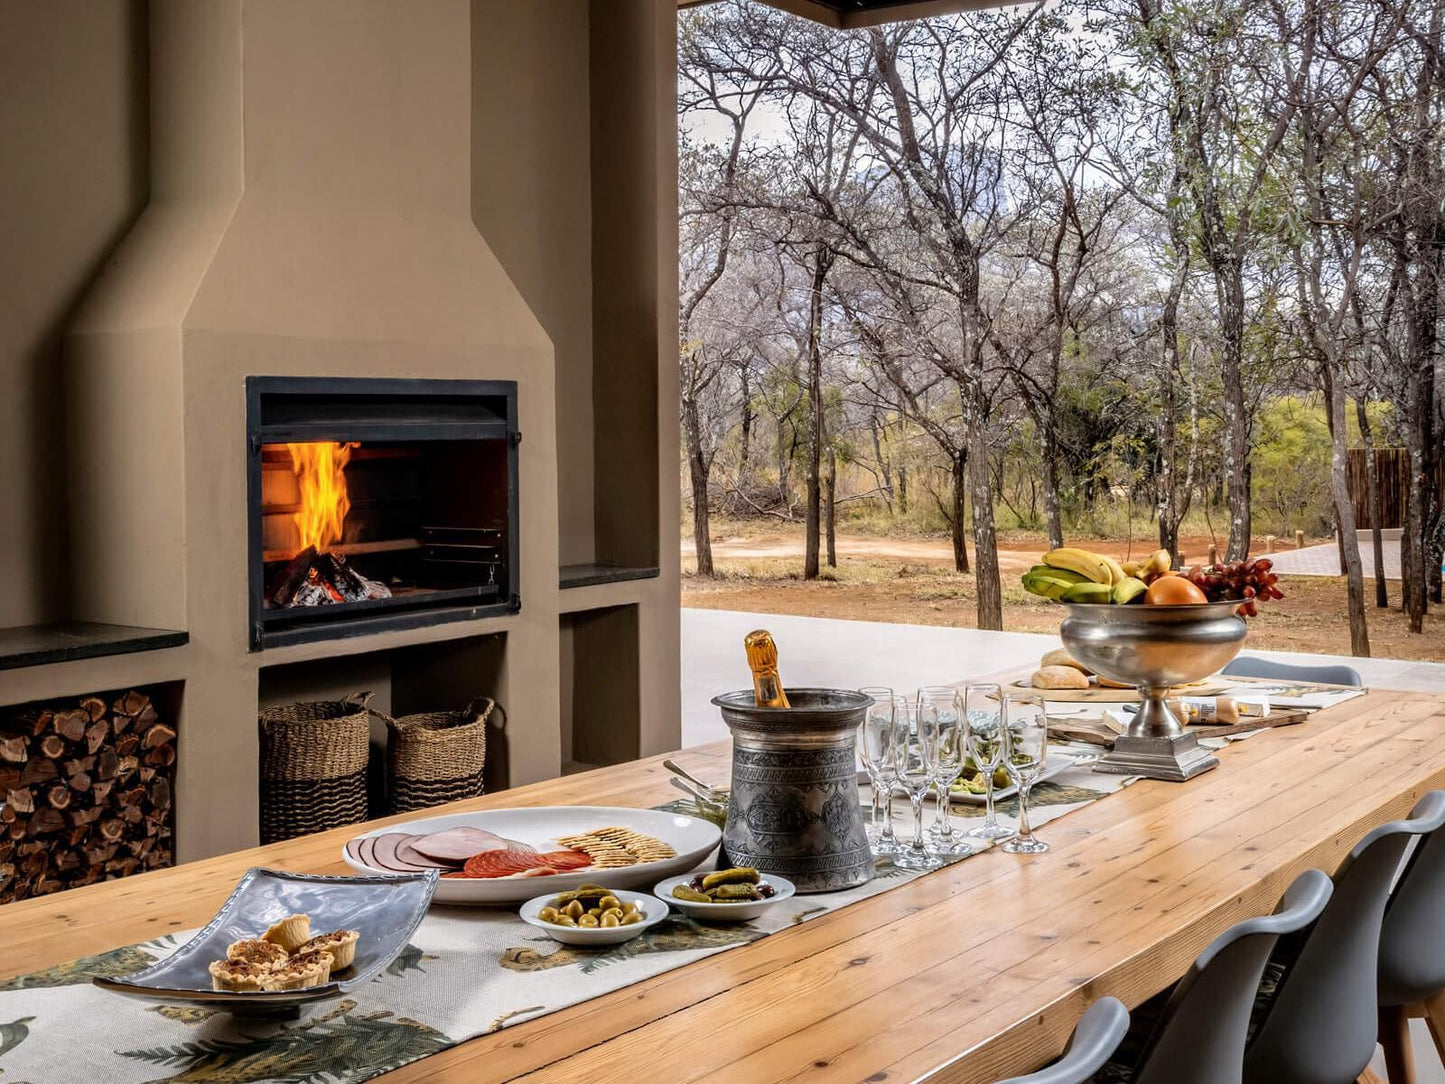 Entabeni Hospitality Entabeni Private Game Reserve Limpopo Province South Africa Fire, Nature, Place Cover, Food